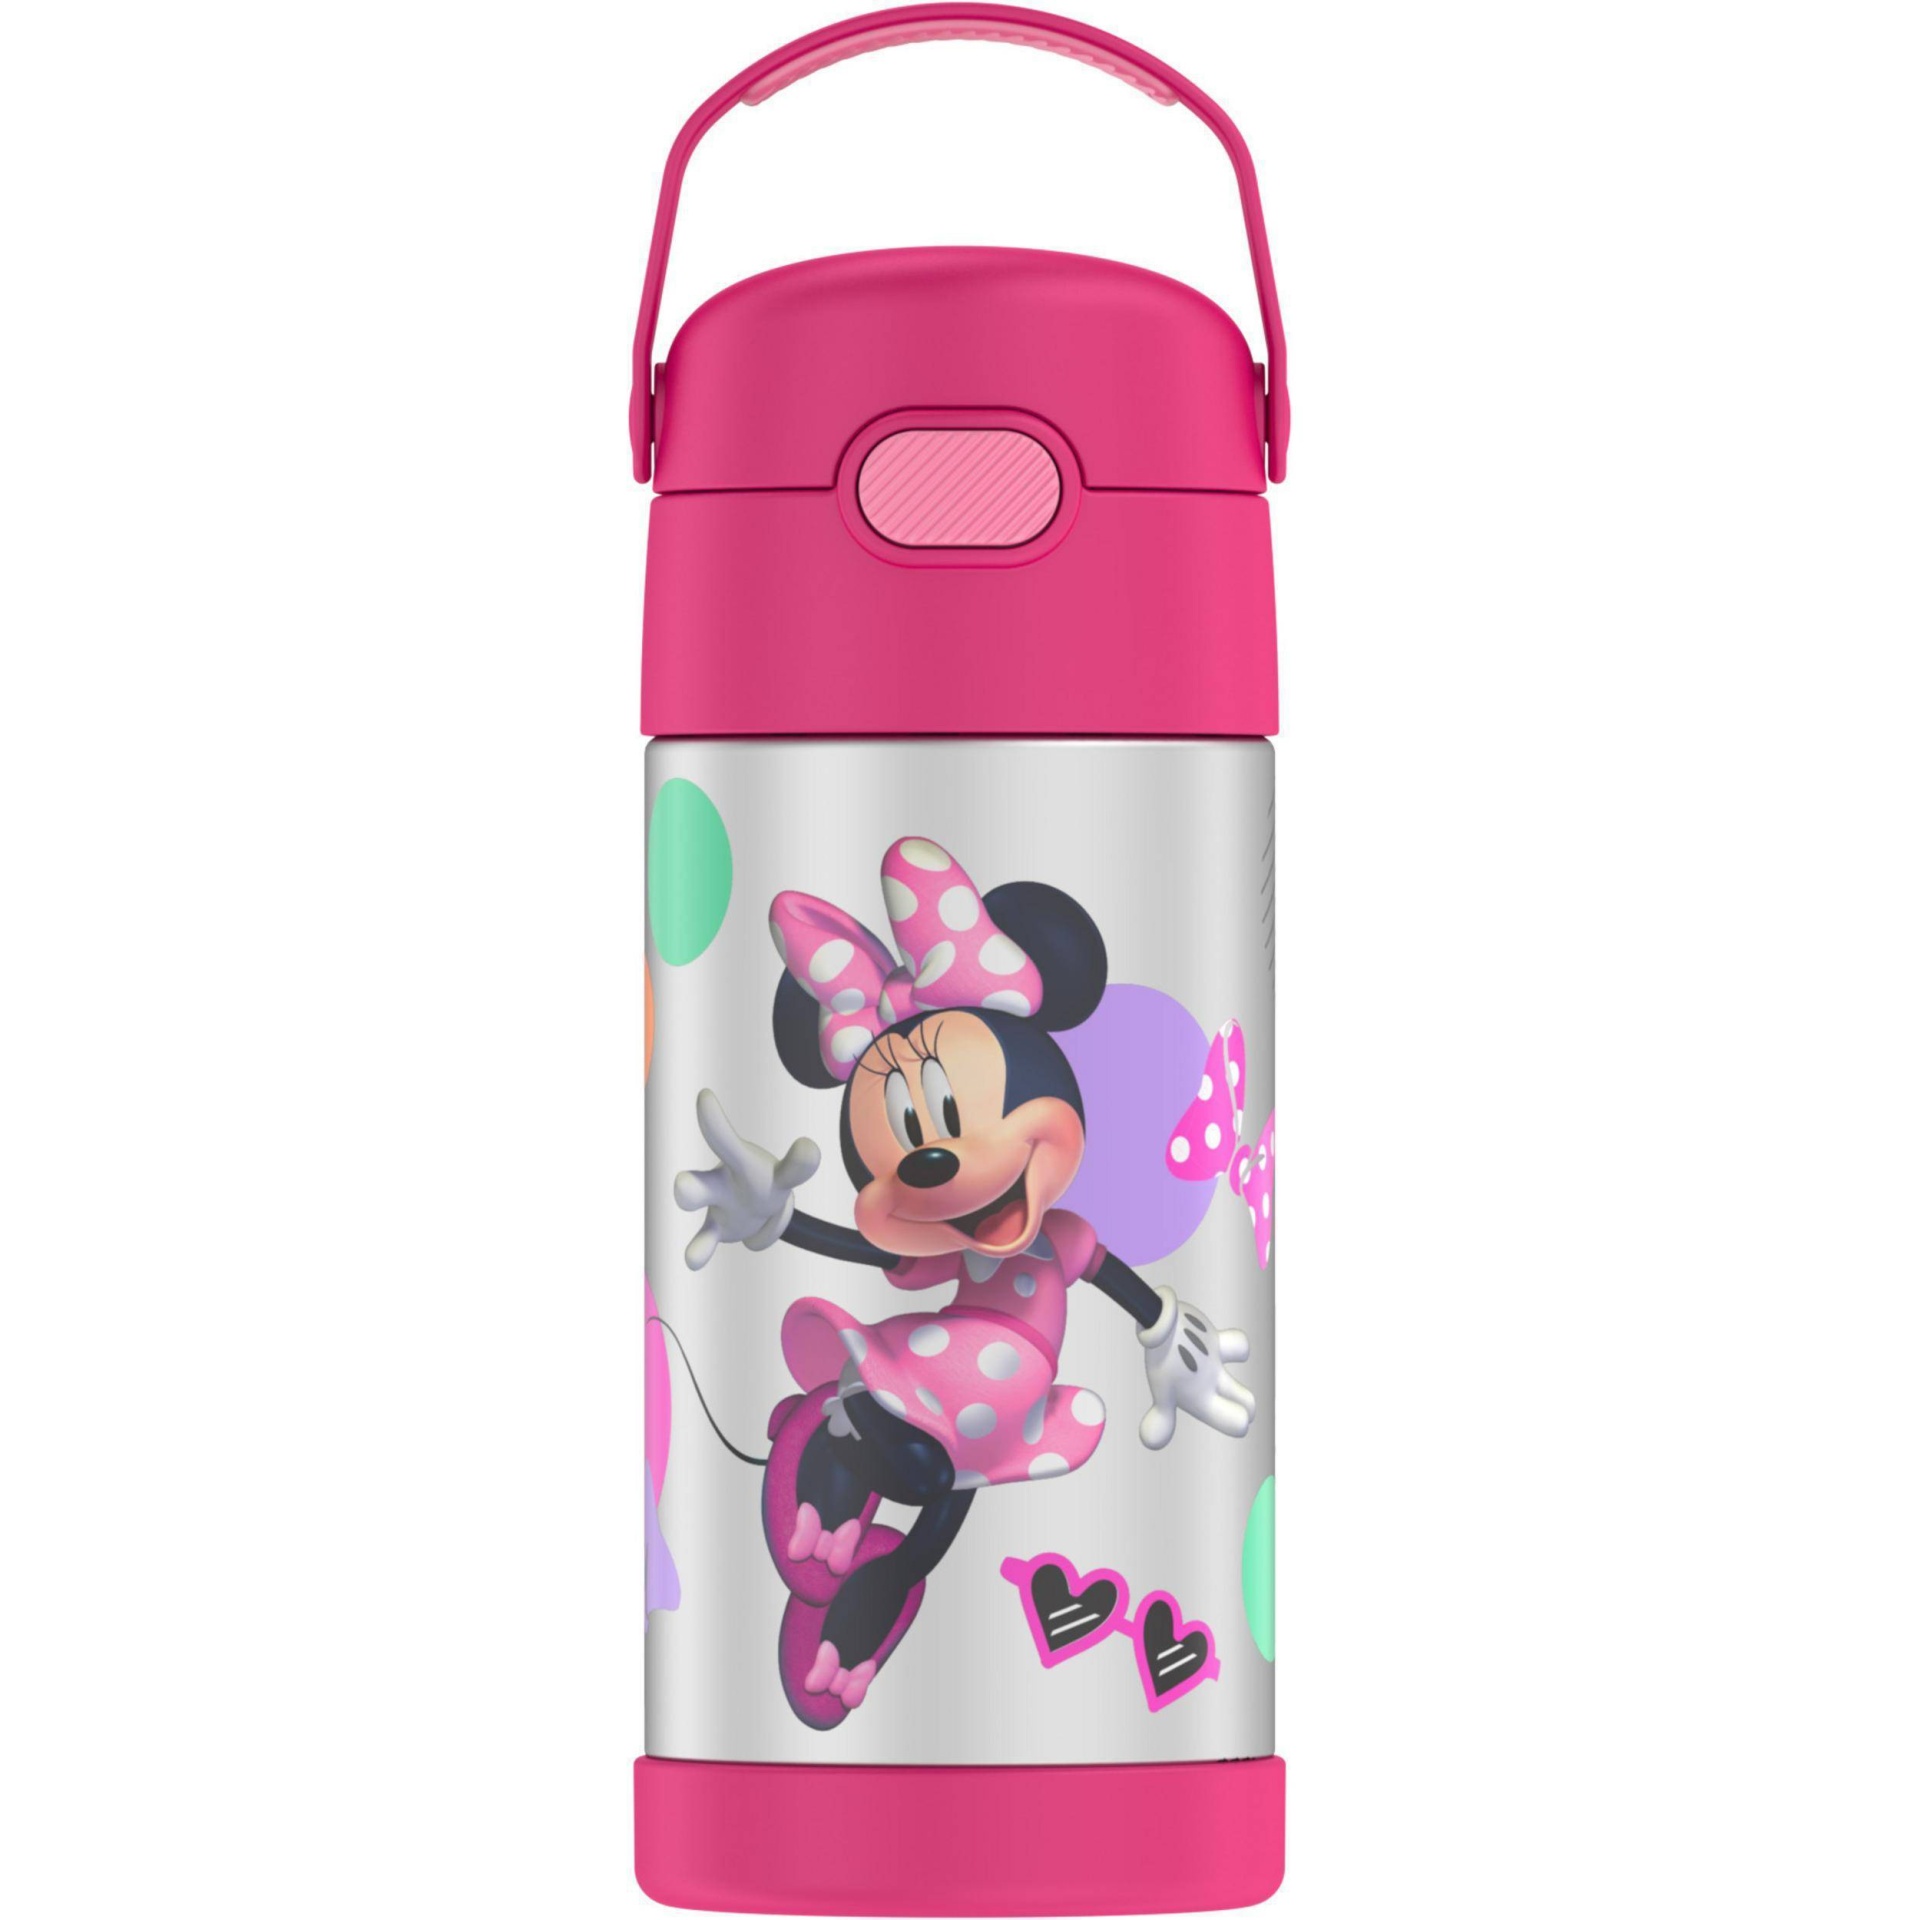 Thermos 12-oz. Funtainer Bottle, Pink